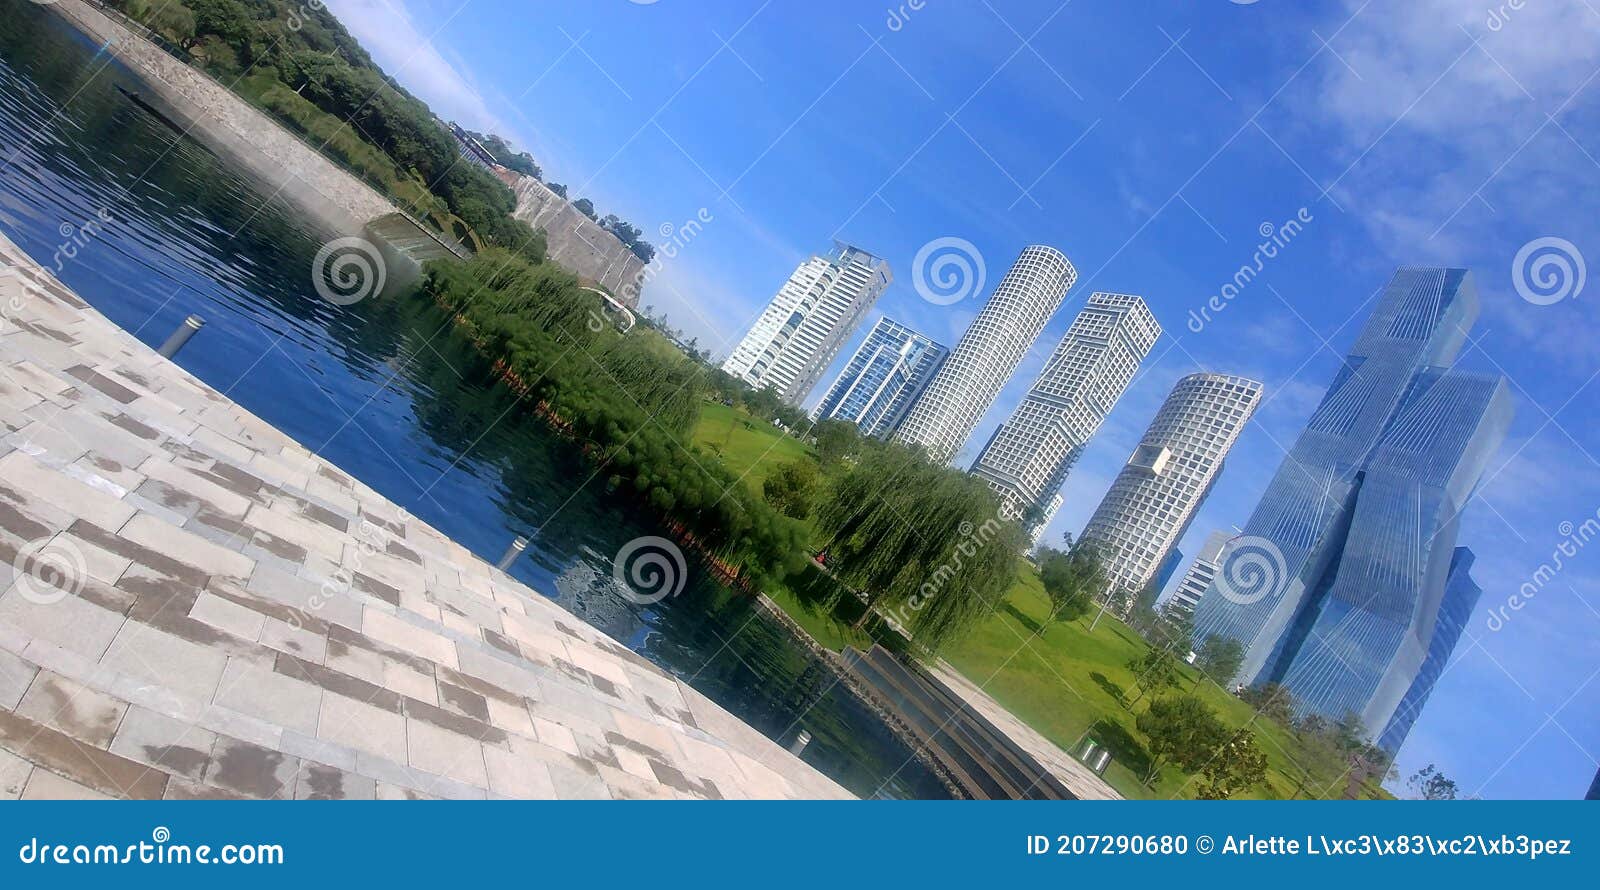 urban landscape with park and buildings modern architecture in the background